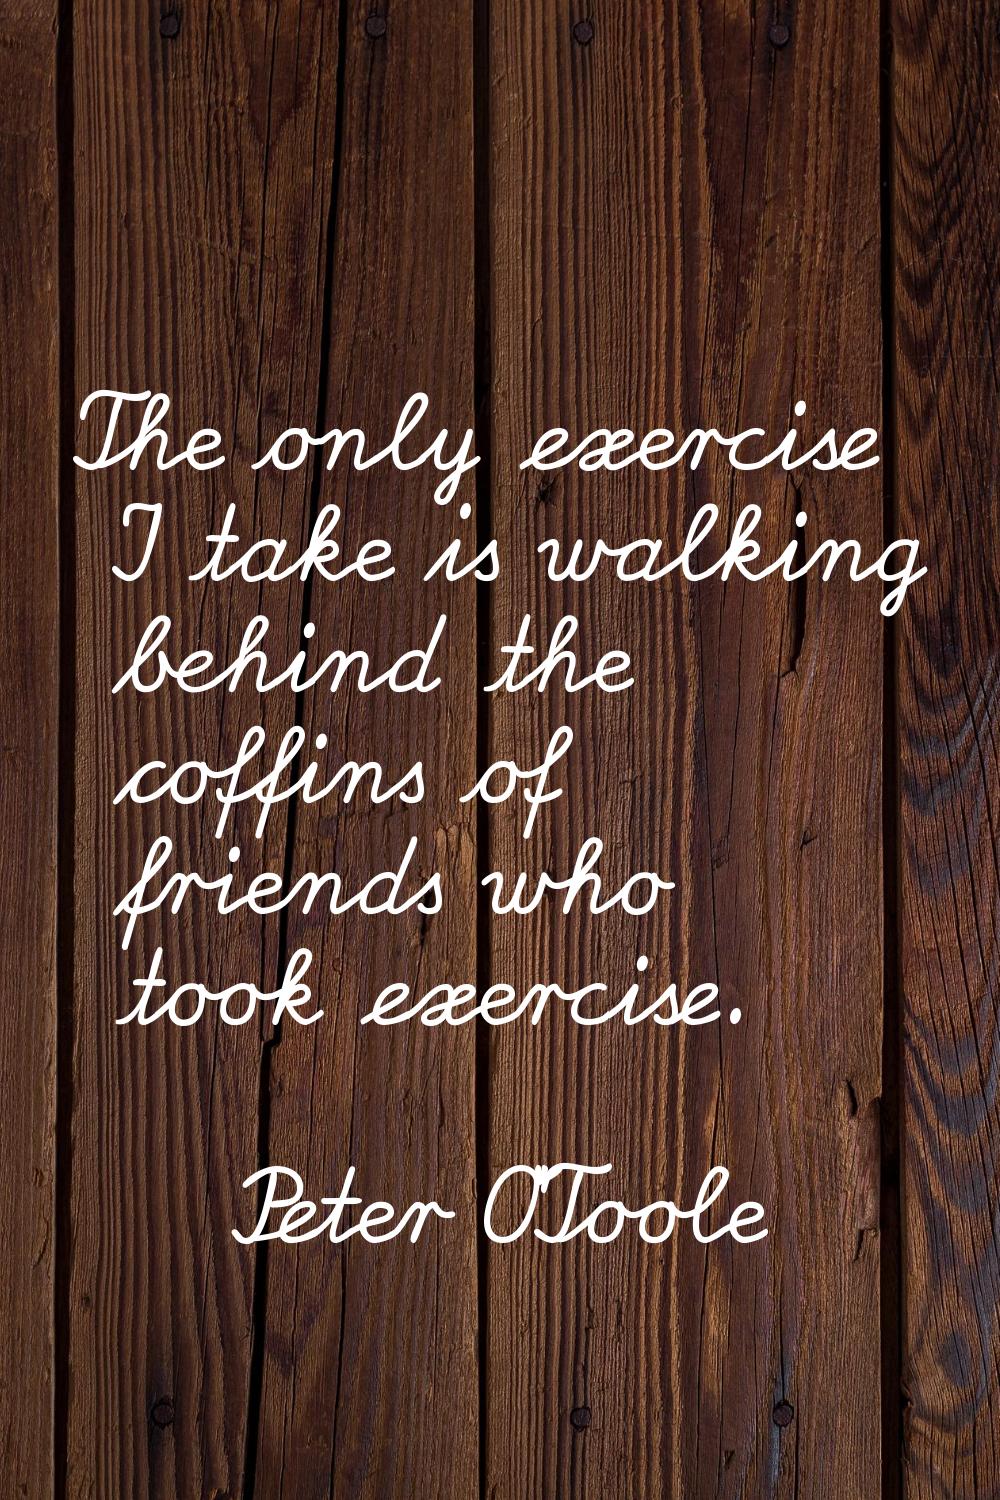 The only exercise I take is walking behind the coffins of friends who took exercise.